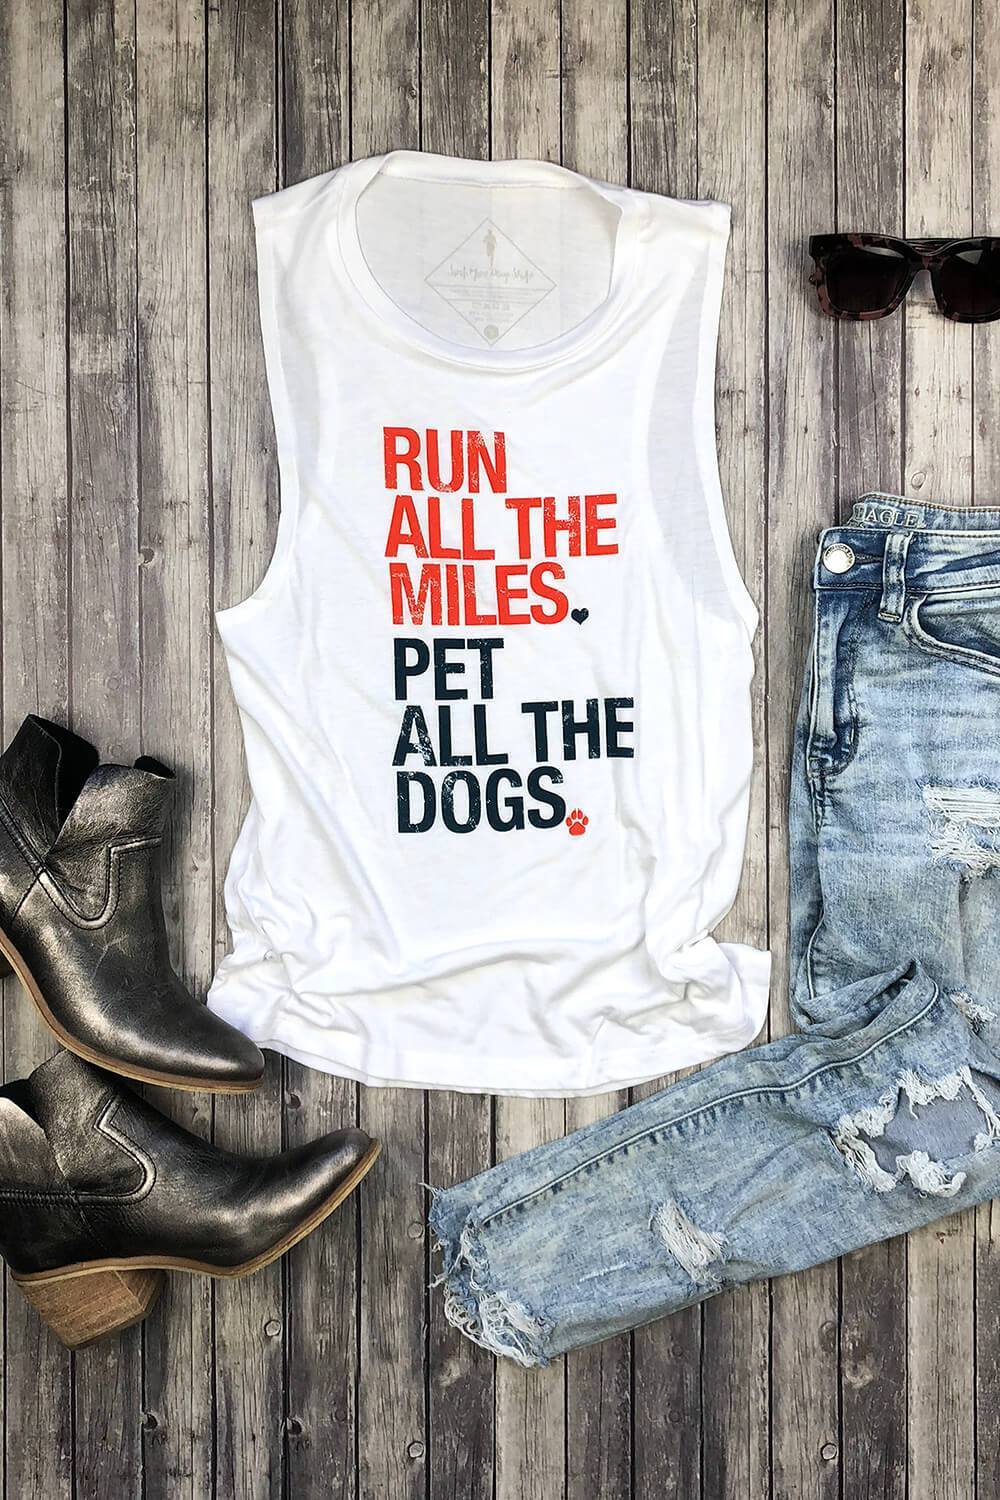 Run All The Miles Drink All The Beer Tank, Womens Workout Top